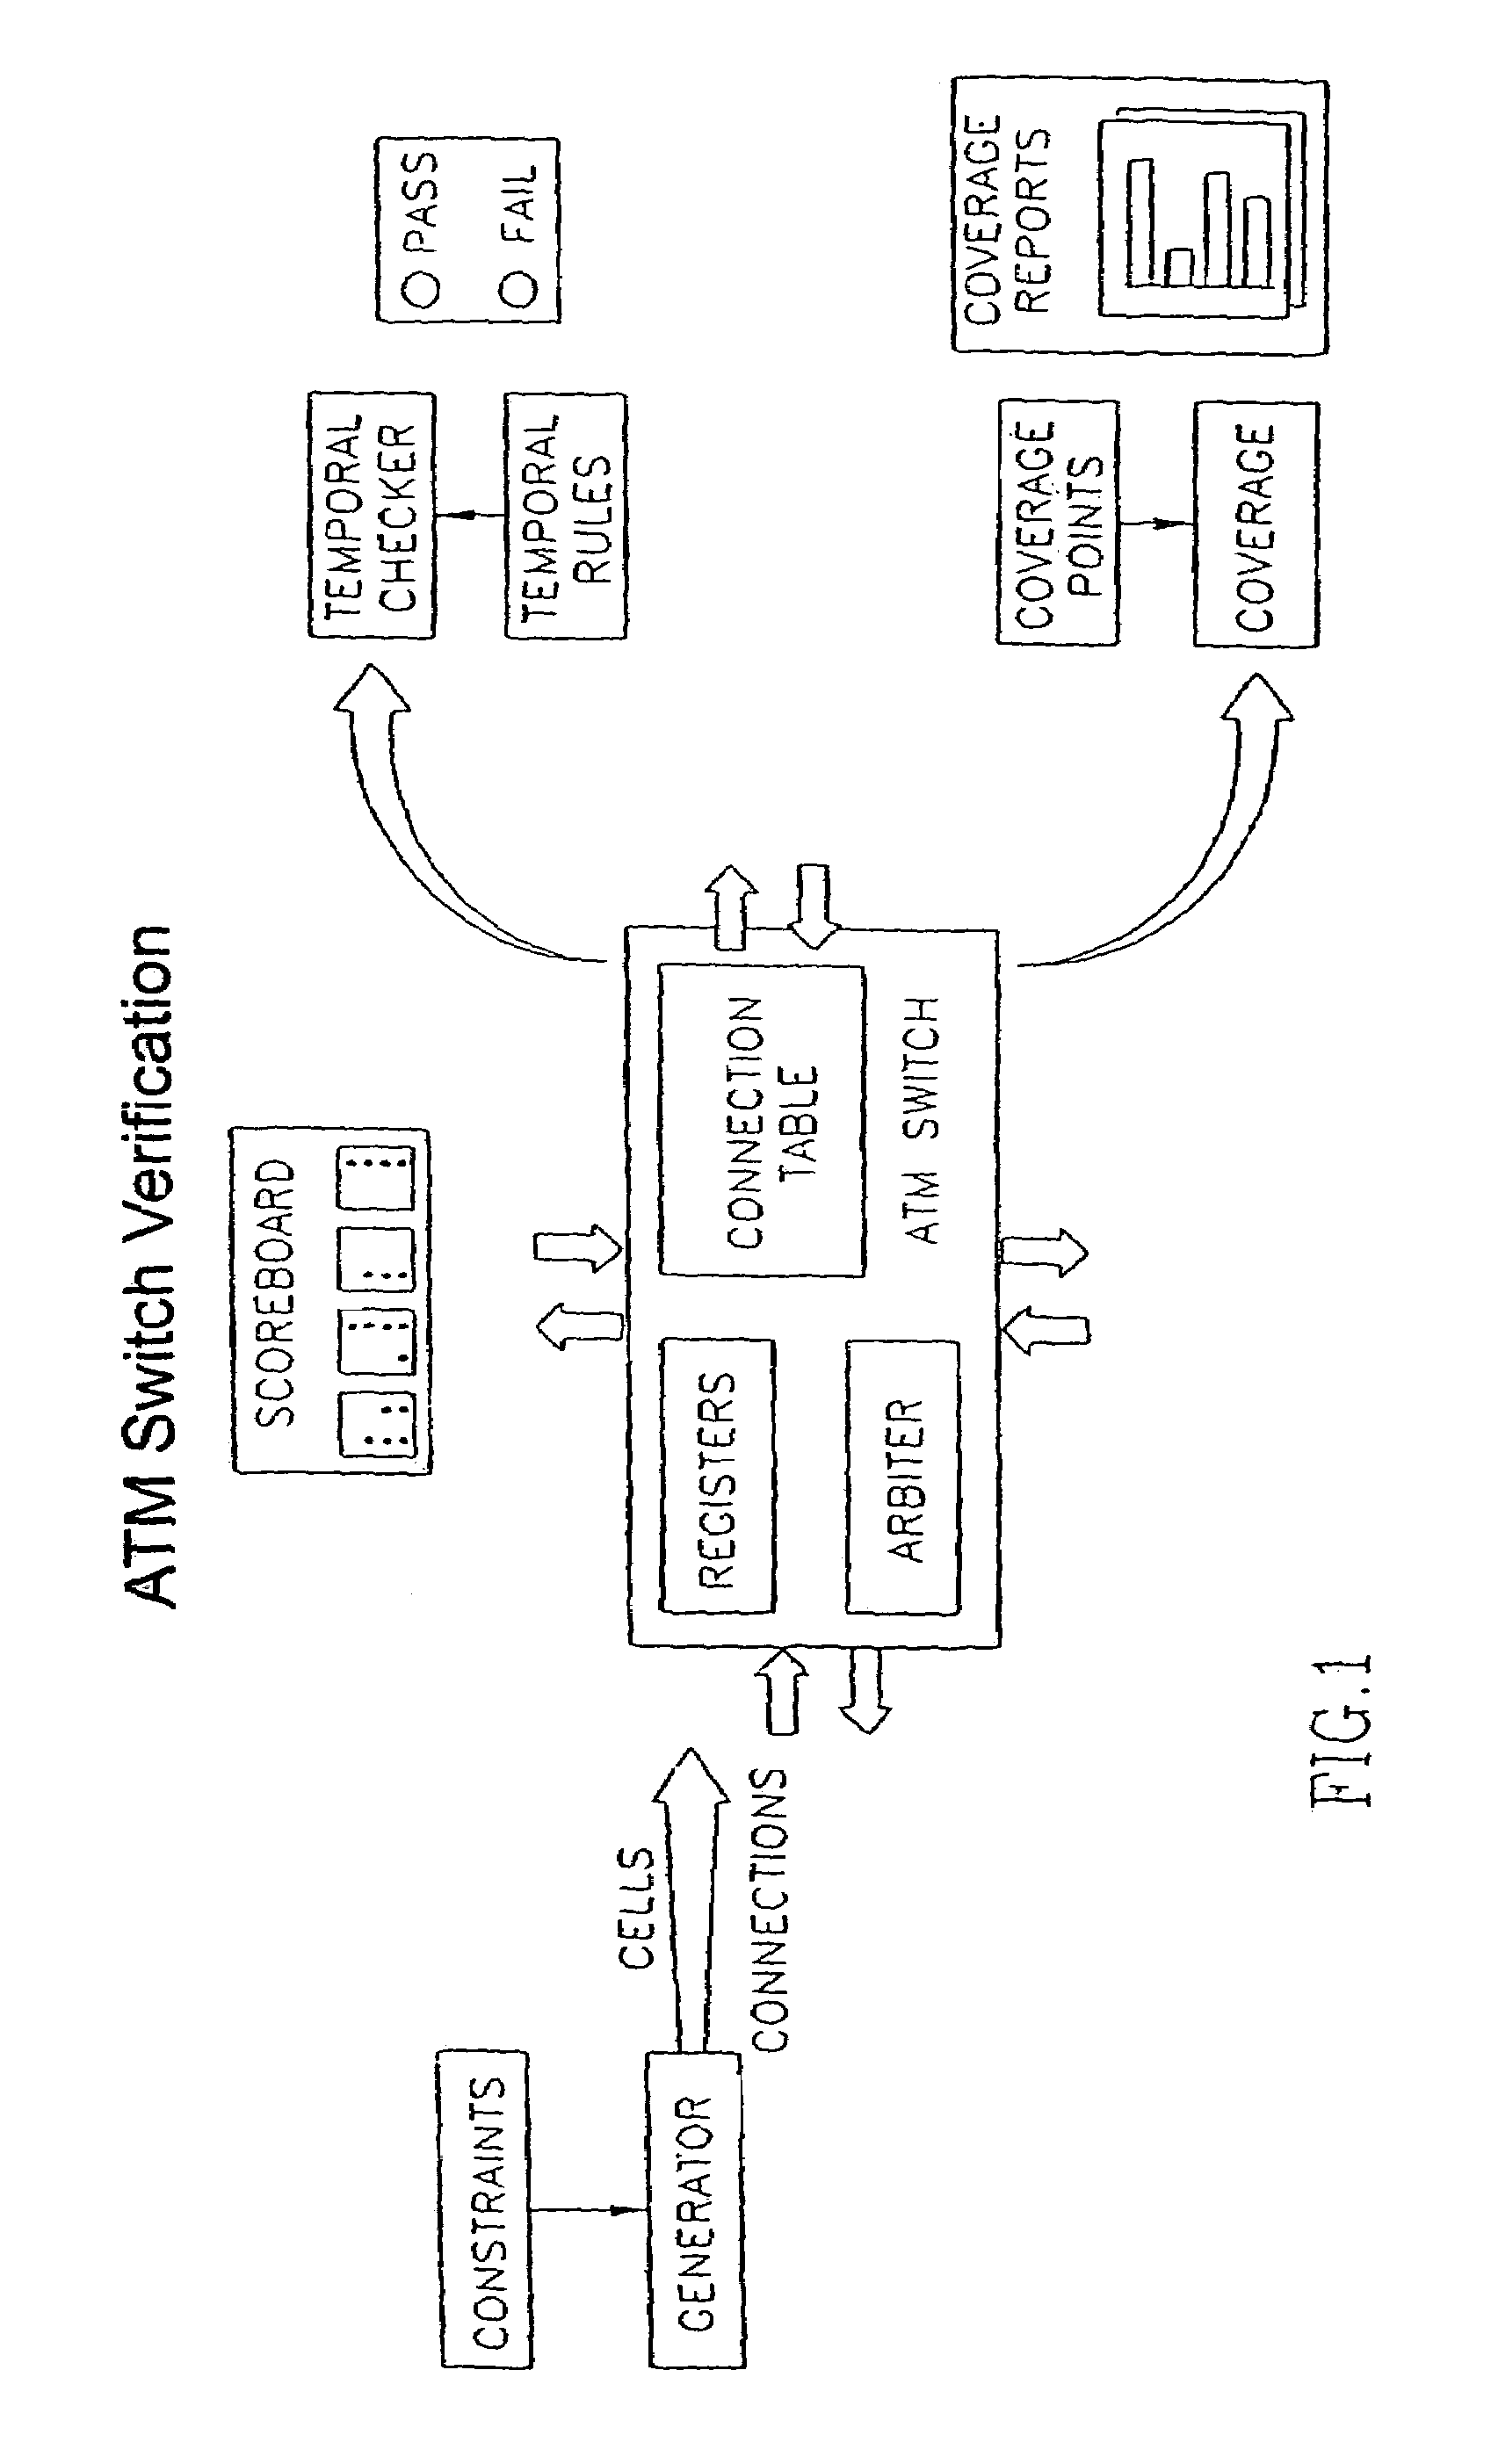 Method and apparatus for maximizing test coverage